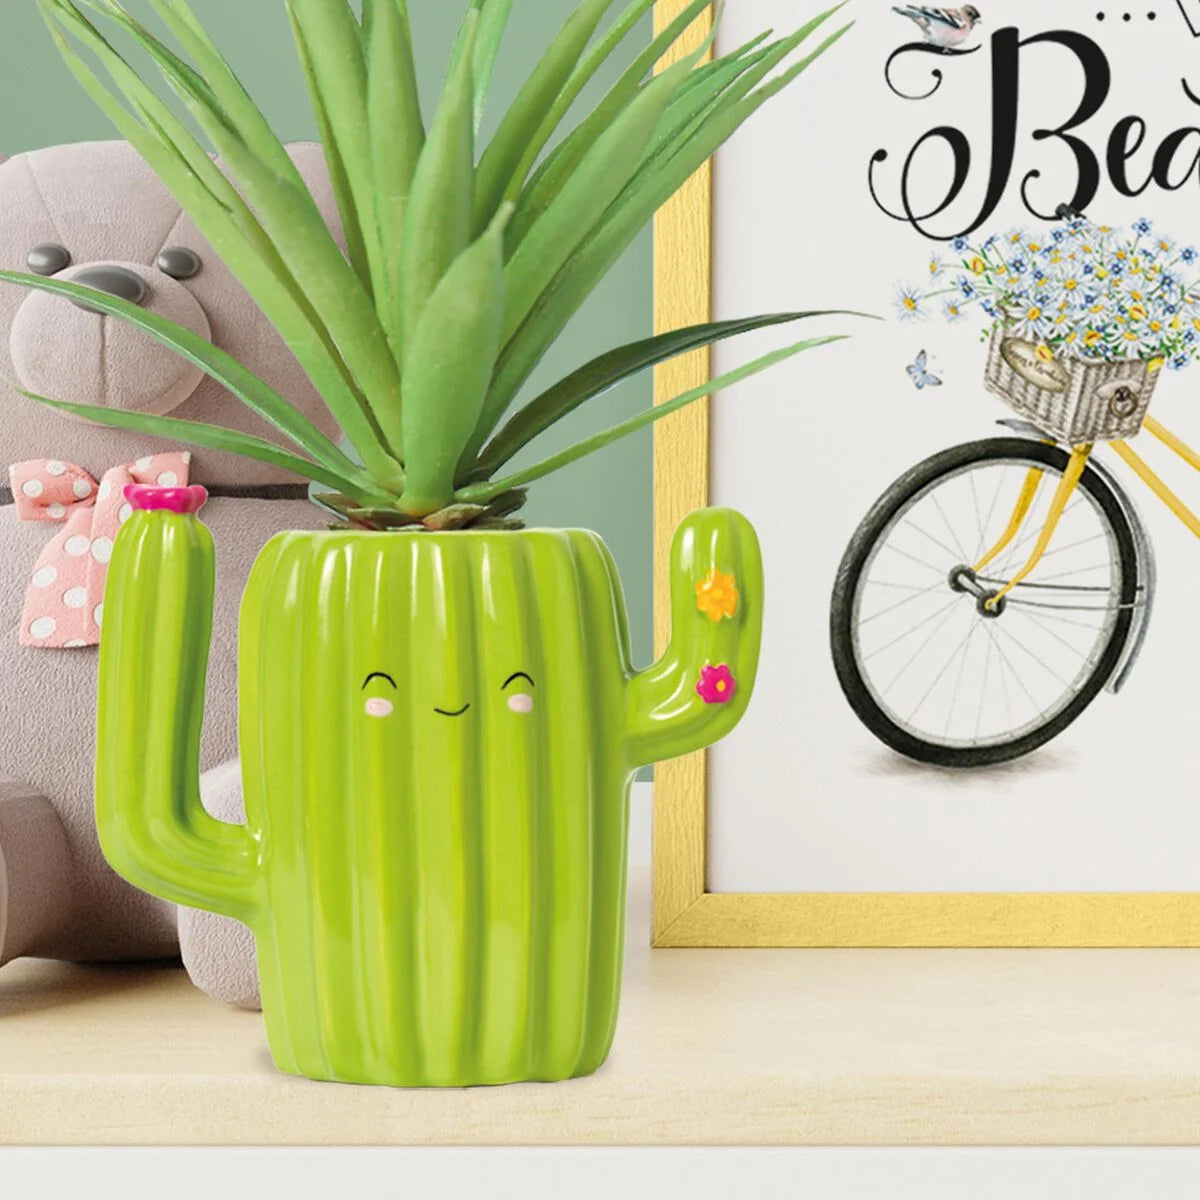 Fabulous Gifts Stationery Legami Desk Friends - Cactus by Weirs of Baggot Street